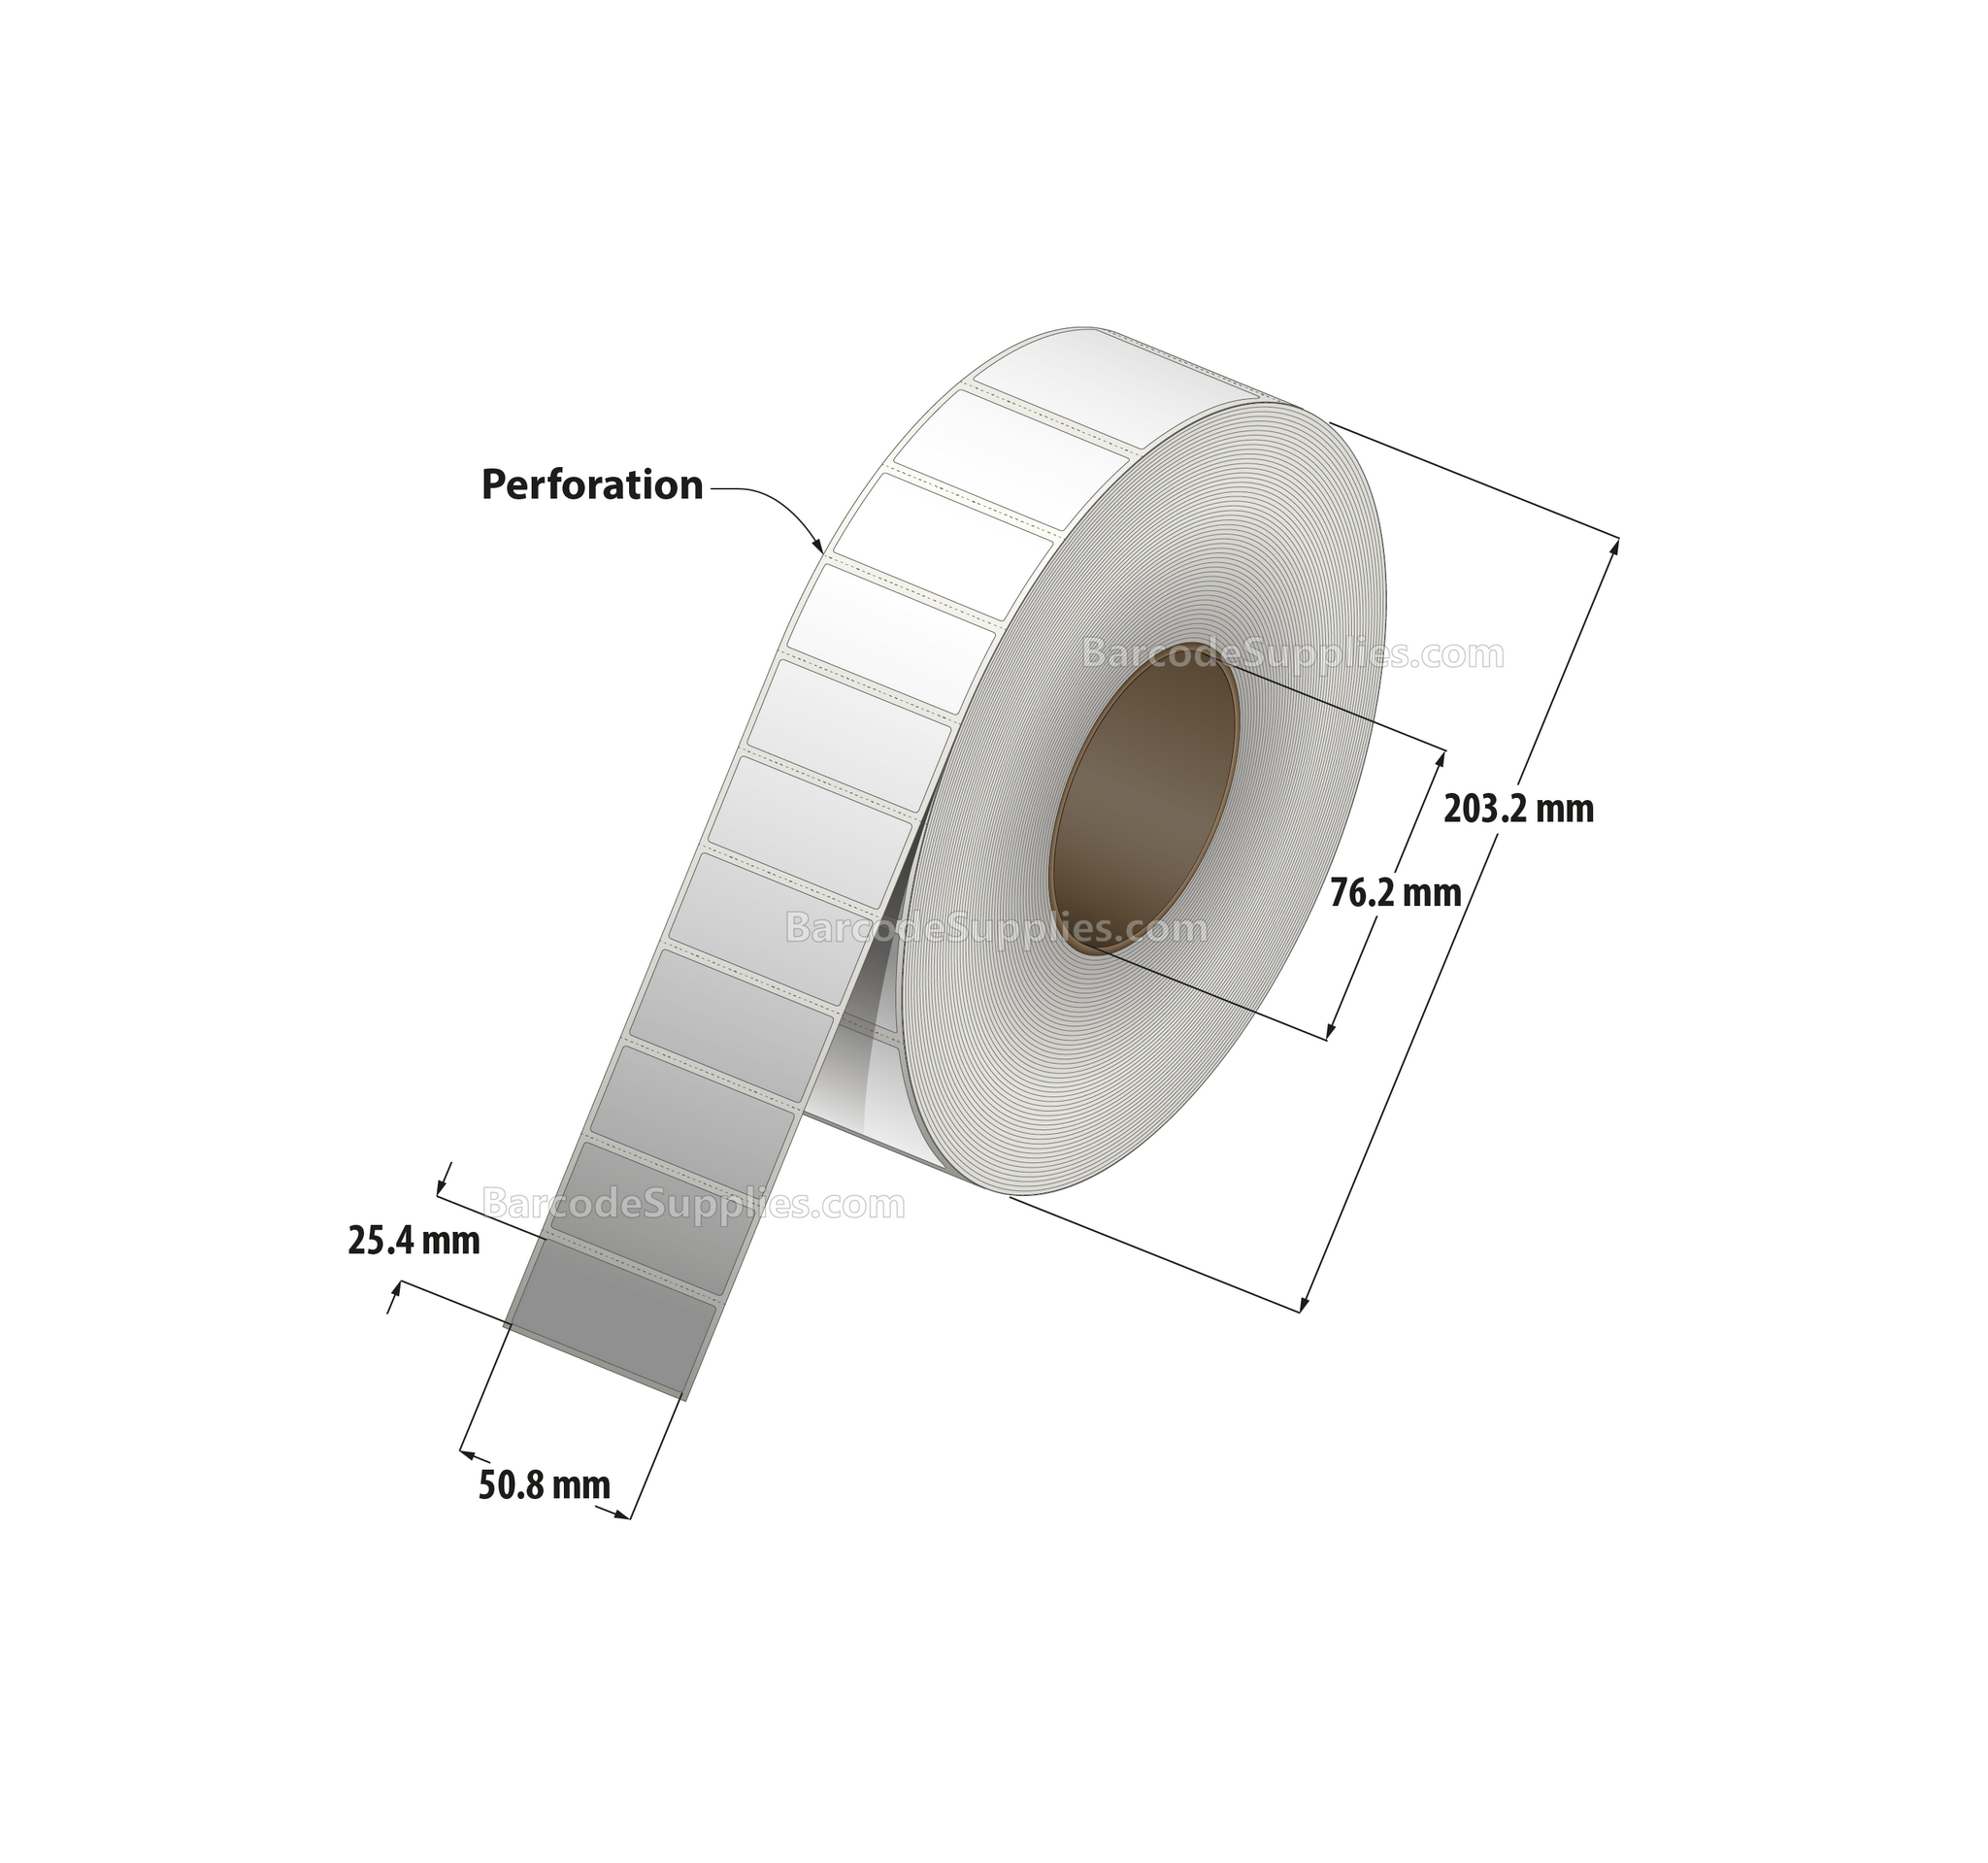 2 x 1 Direct Thermal White Labels With Acrylic Adhesive - Perforated - 5500 Labels Per Roll - Carton Of 8 Rolls - 44000 Labels Total - MPN: RD-2-1-5500-3 - BarcodeSource, Inc.